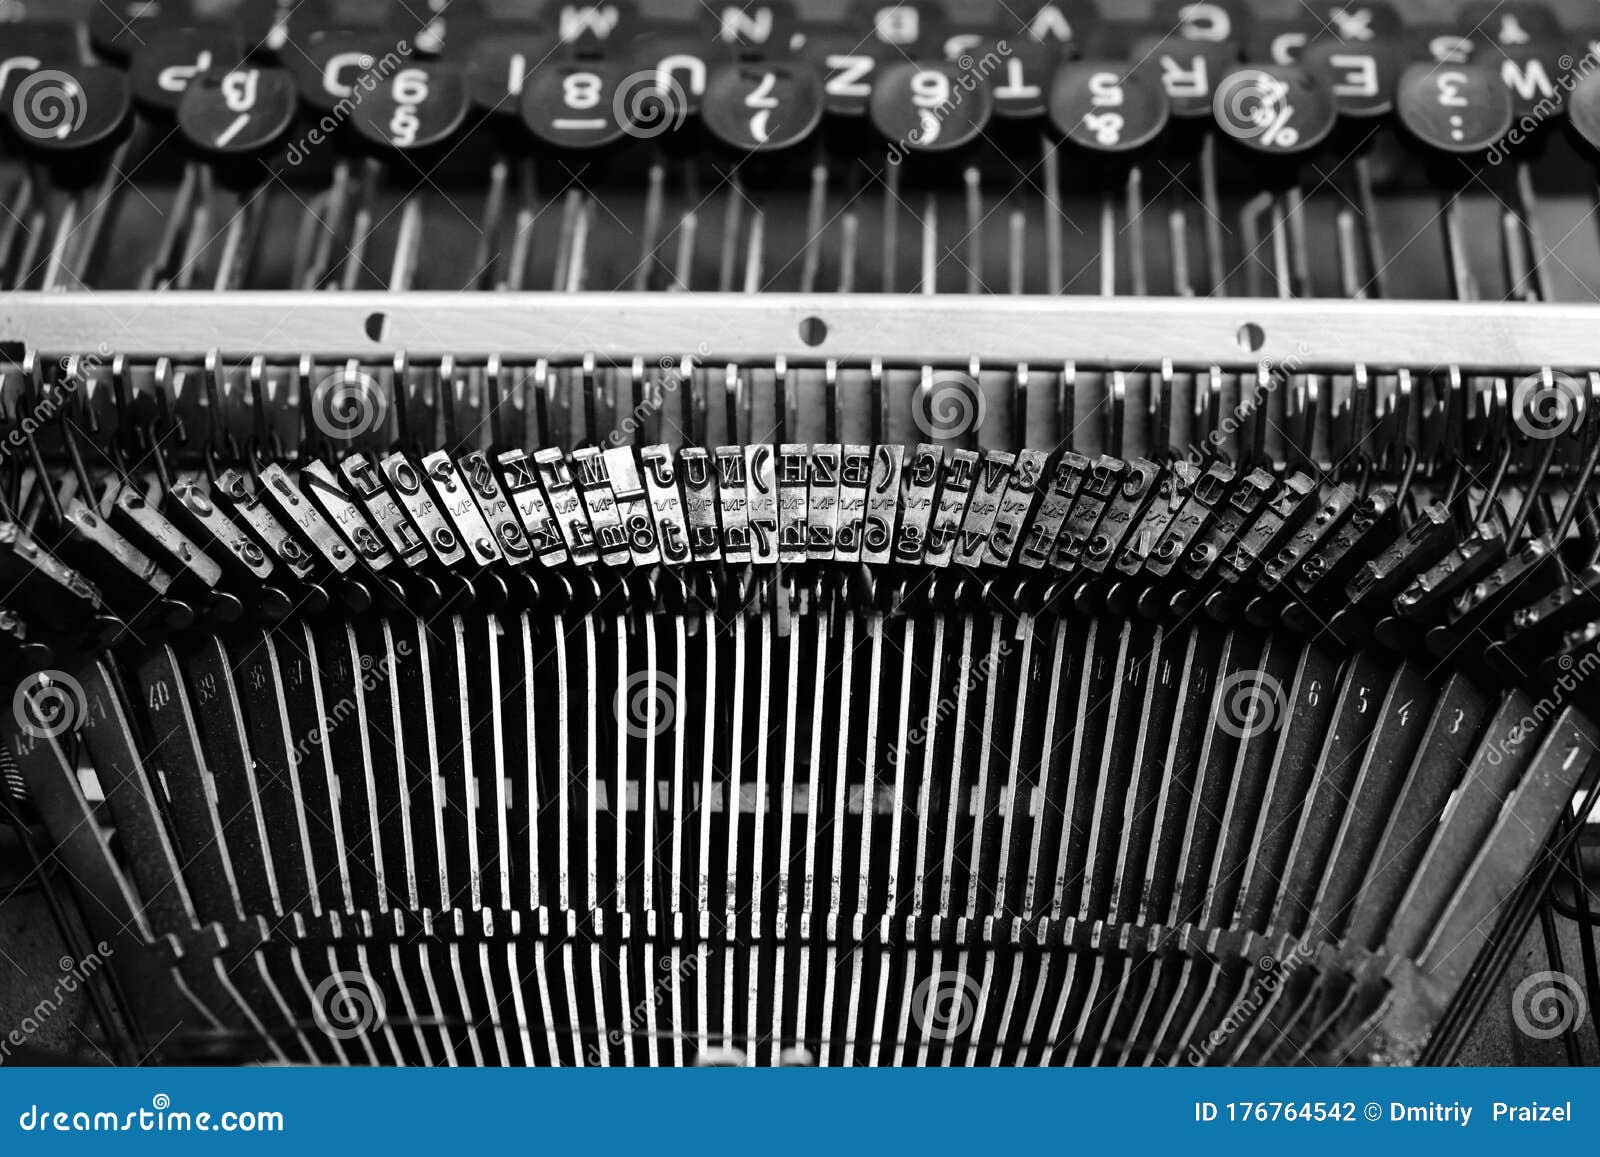 mechanism of typesetting strikers with the english alphabet in an old retro typewriter